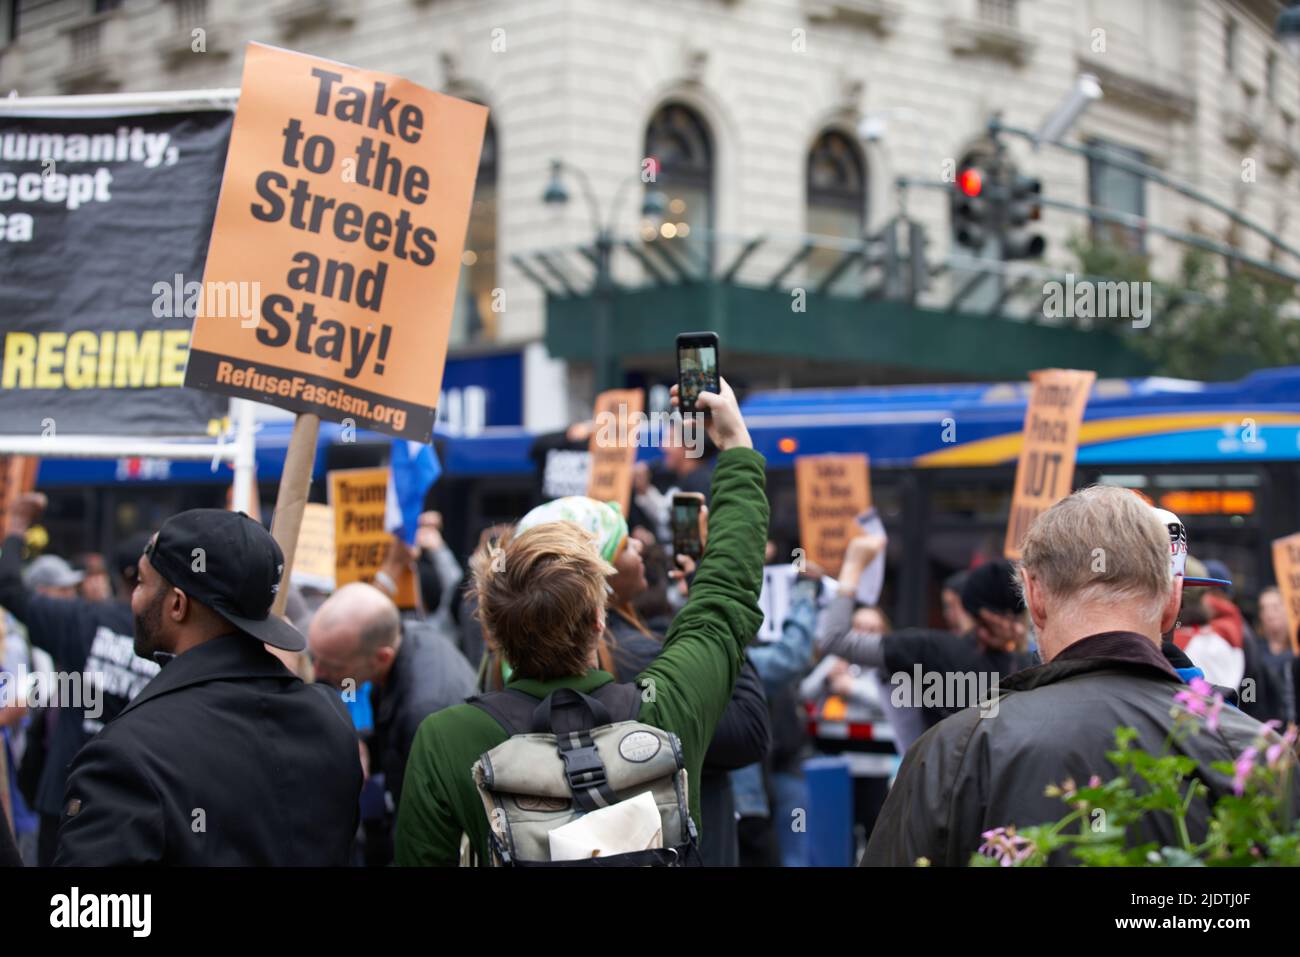 Manhattan, New York,USA - October 26. 2019: Protest in NYC, Take to the Streets and Stay!. Anti Donald Trump protest in Manhattan Stock Photo